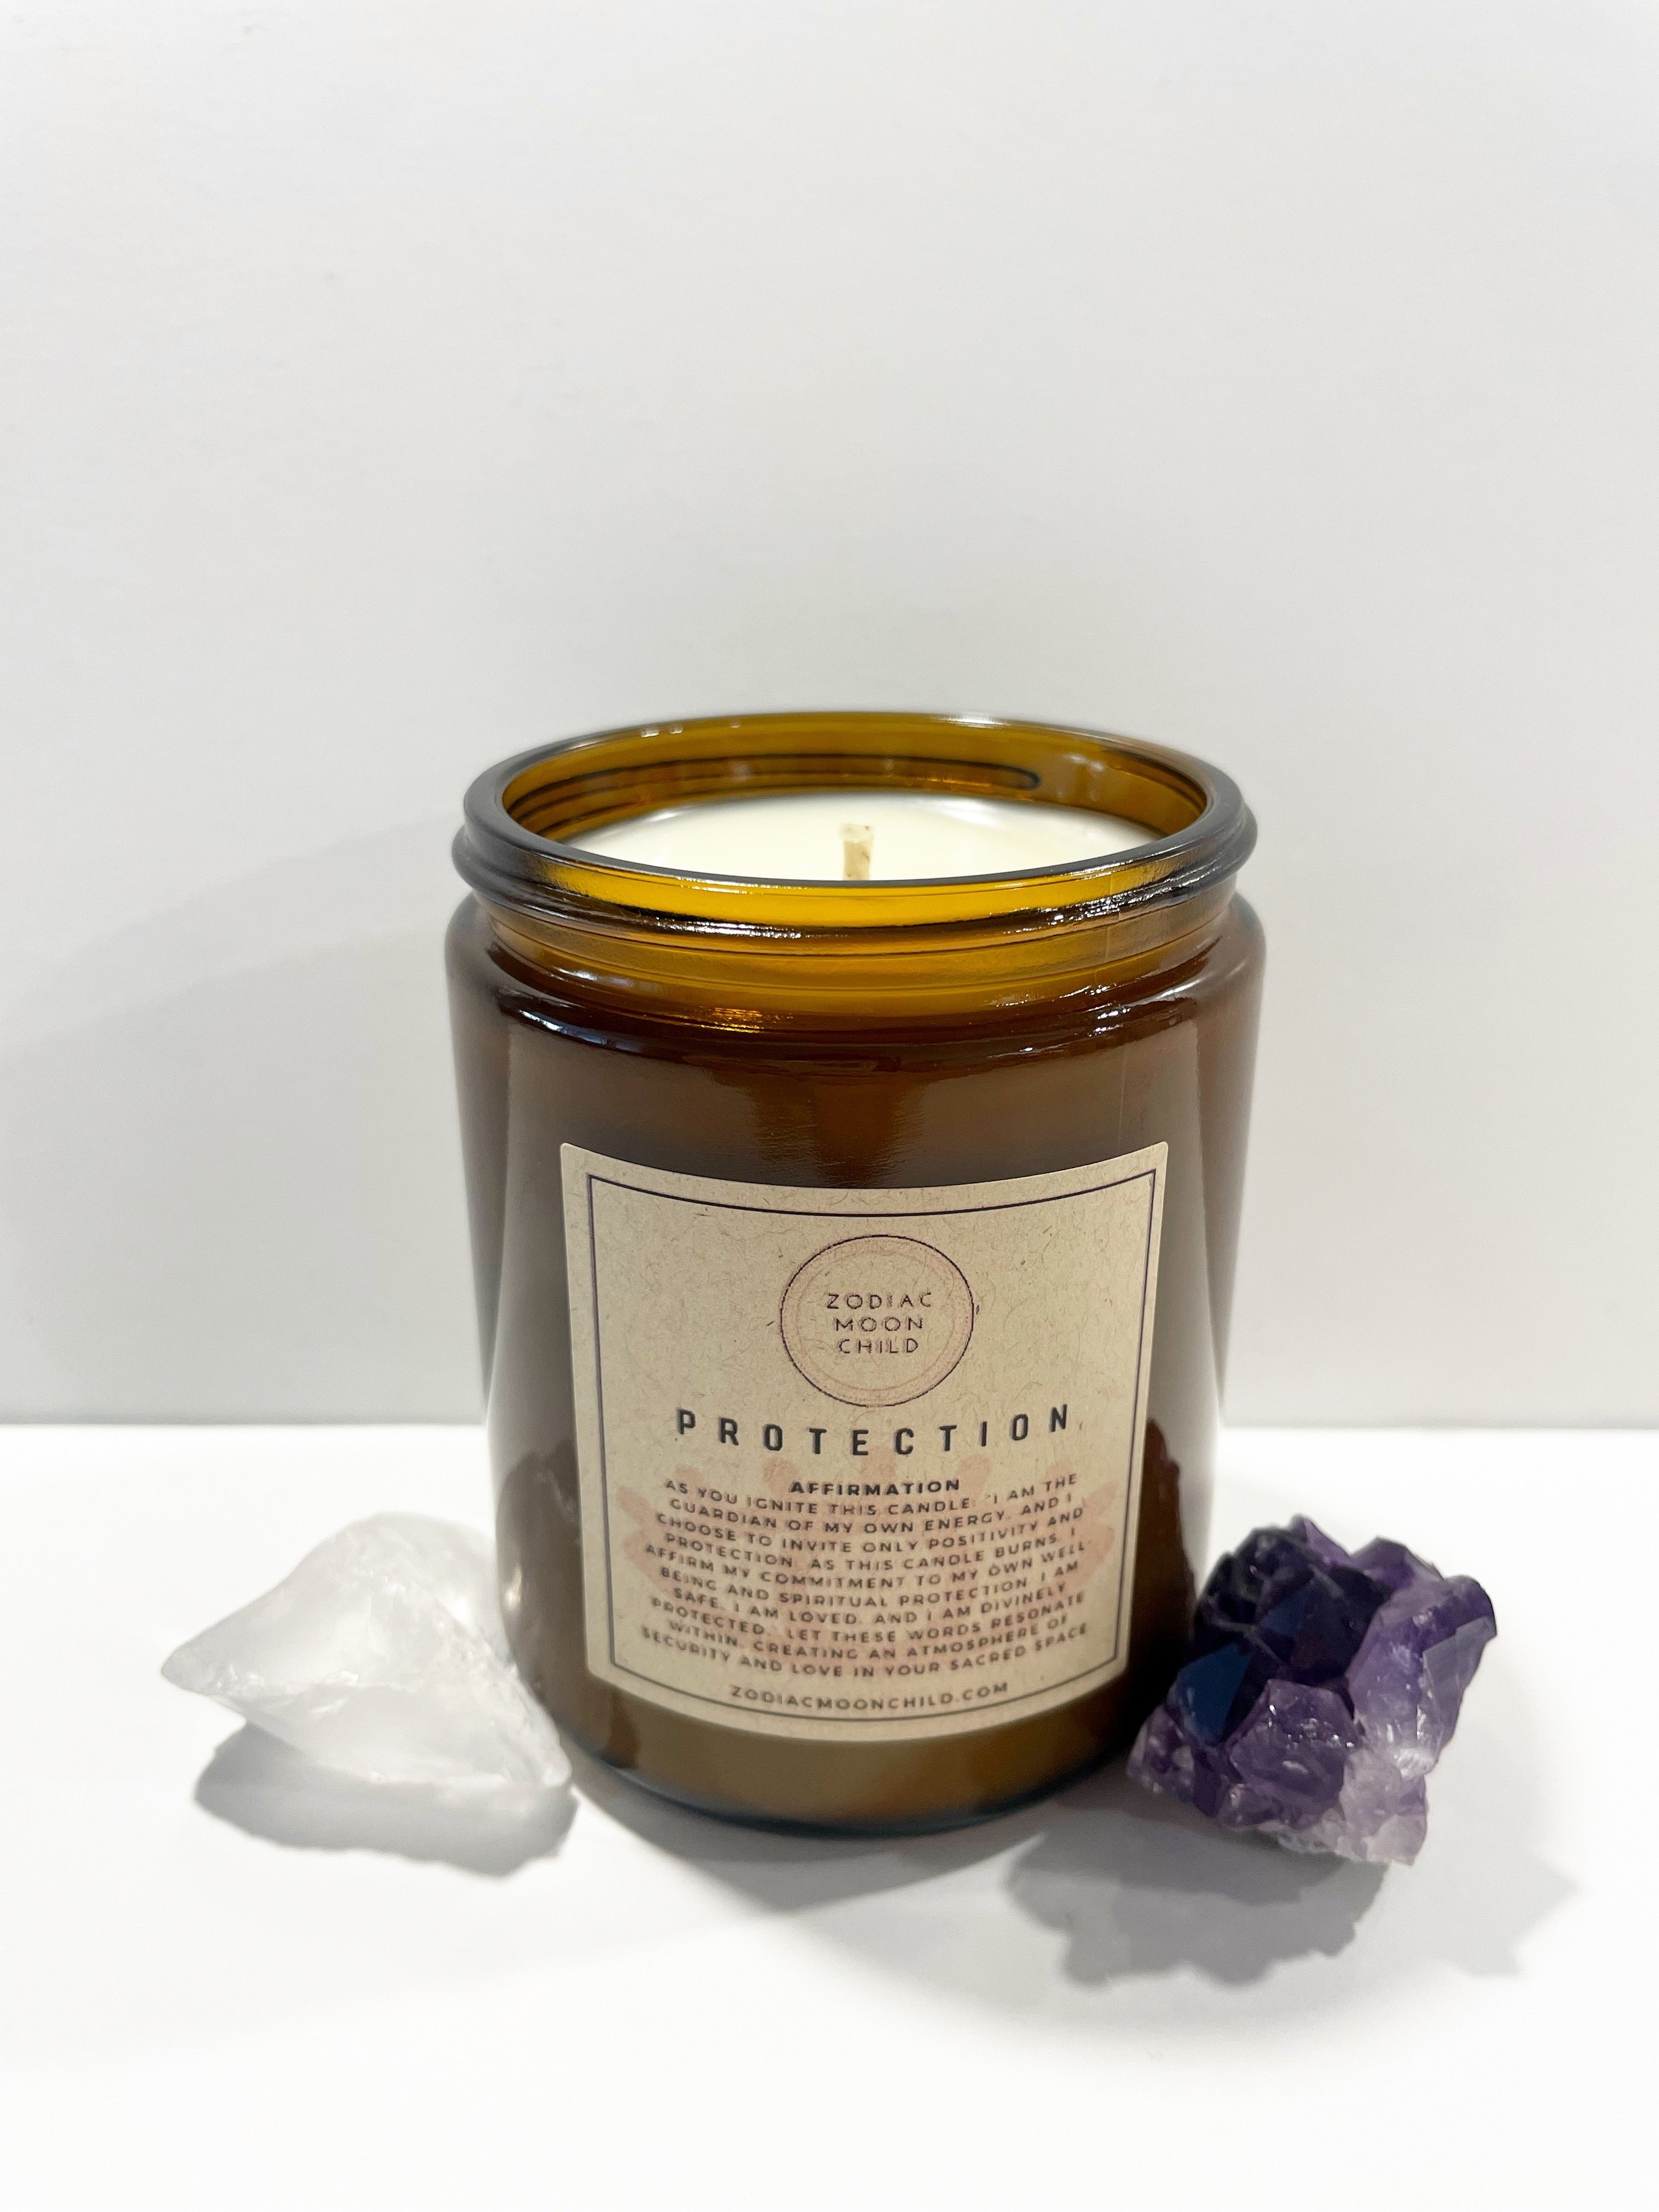 Protect Your Energy with Our Amber Spiritual Soy Candle - Embrace Positivity & Elevate Your Sacred Zen Space - 100% Natural Soy Wax, Energy